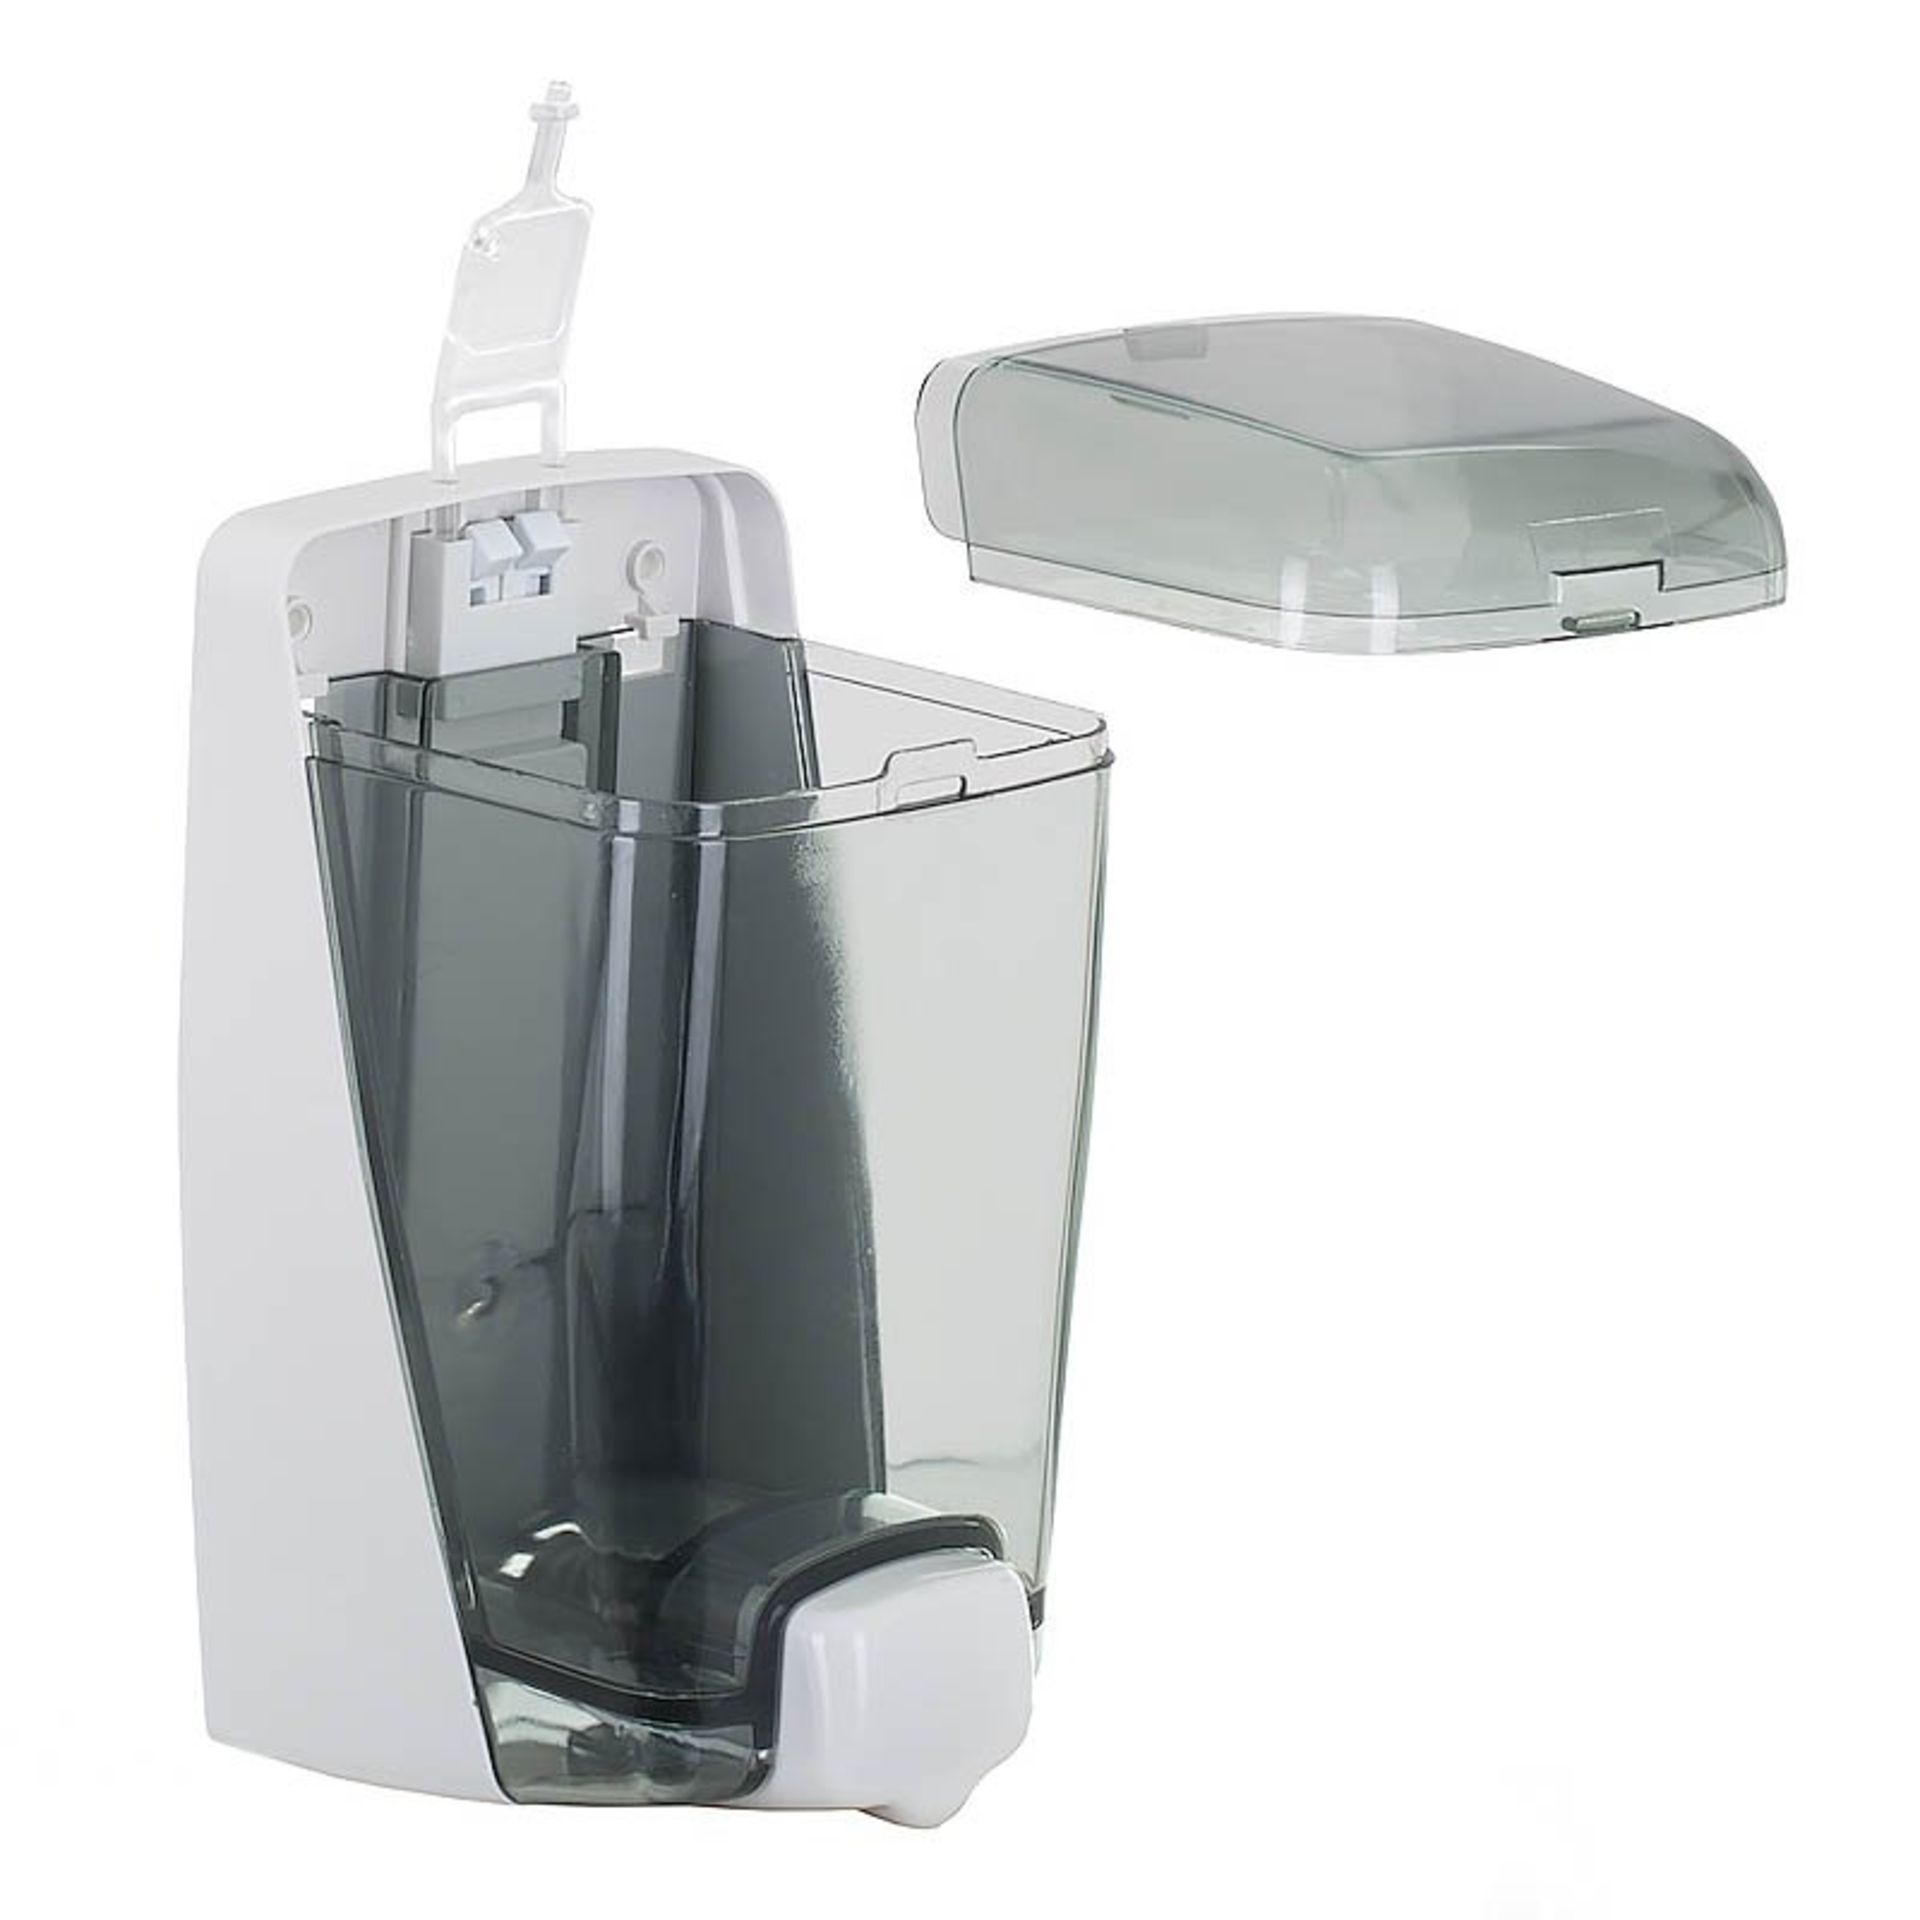 64 x Azure 1000ml Refillable Liquid Soap Dispensers - Suitable For 70% Ethanol Alcohol Gels and - Image 4 of 6